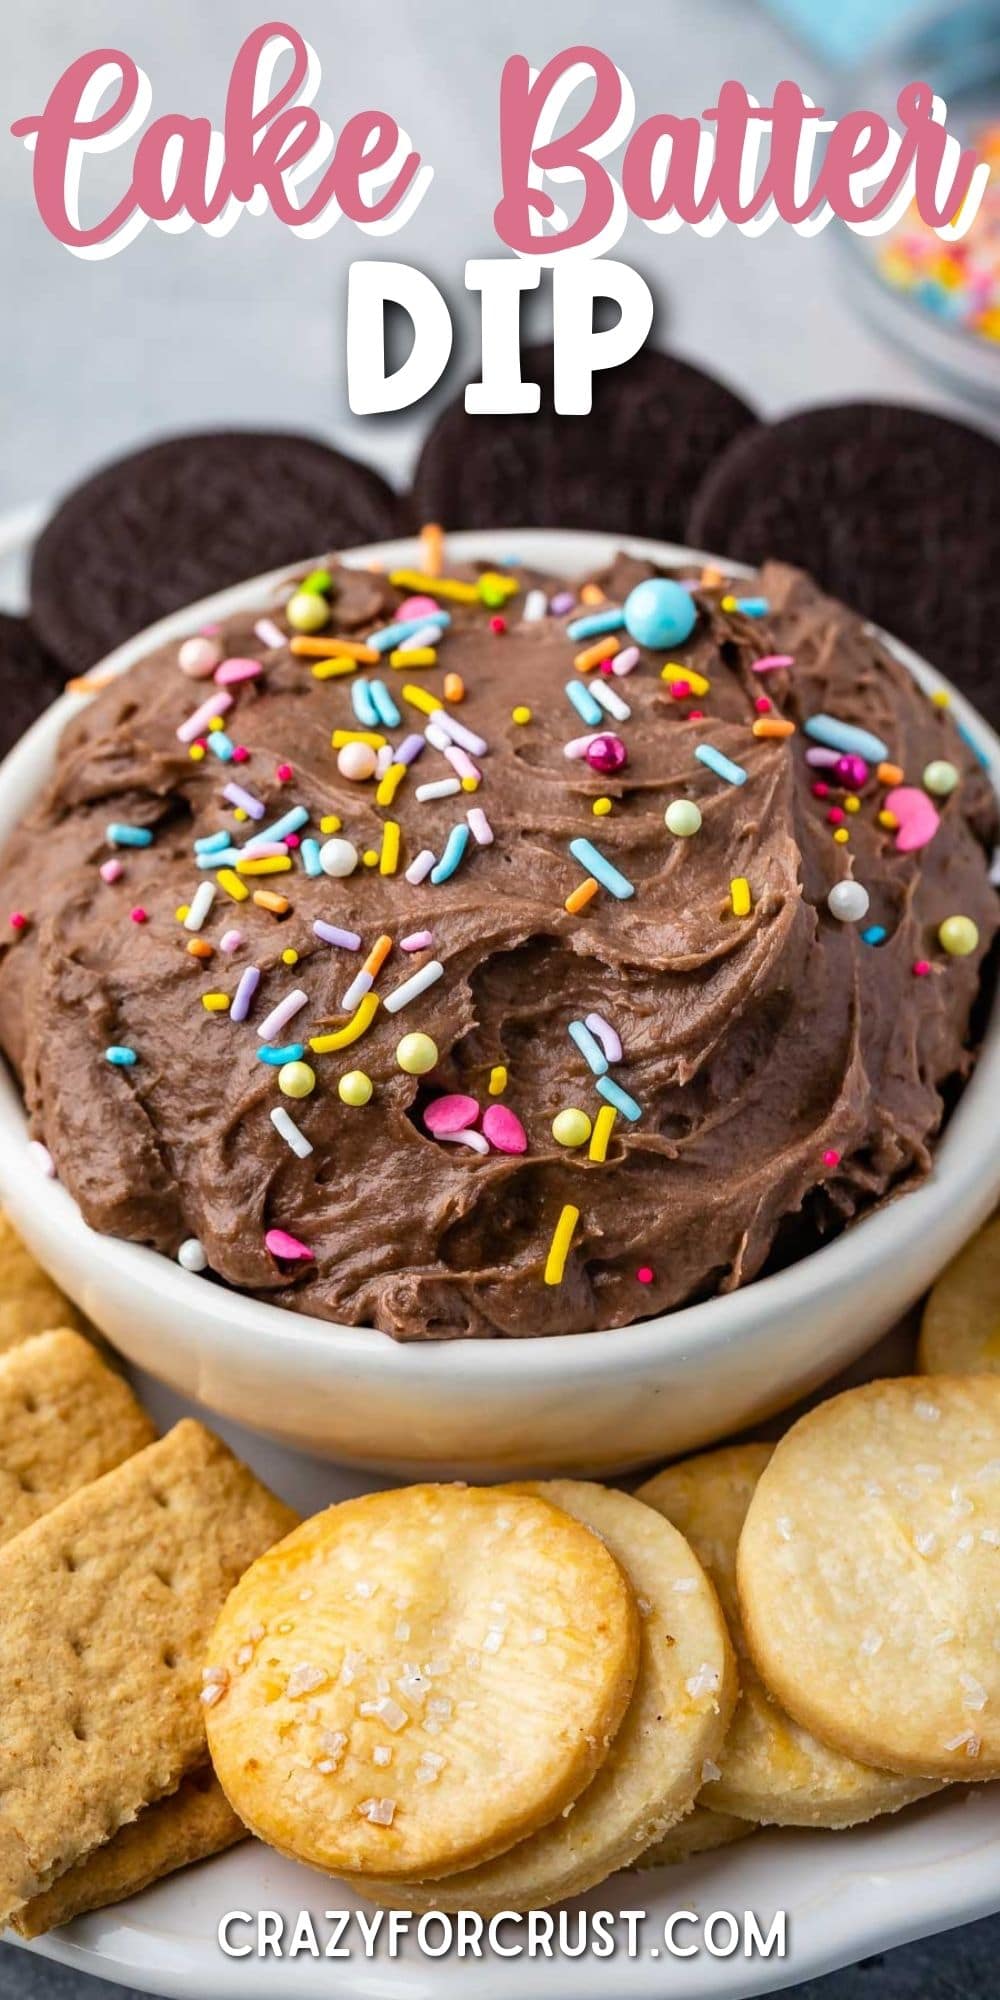 Cake batter dip in a bowl topped with sprinkles and surrounded by dippers with recipe title on top of image